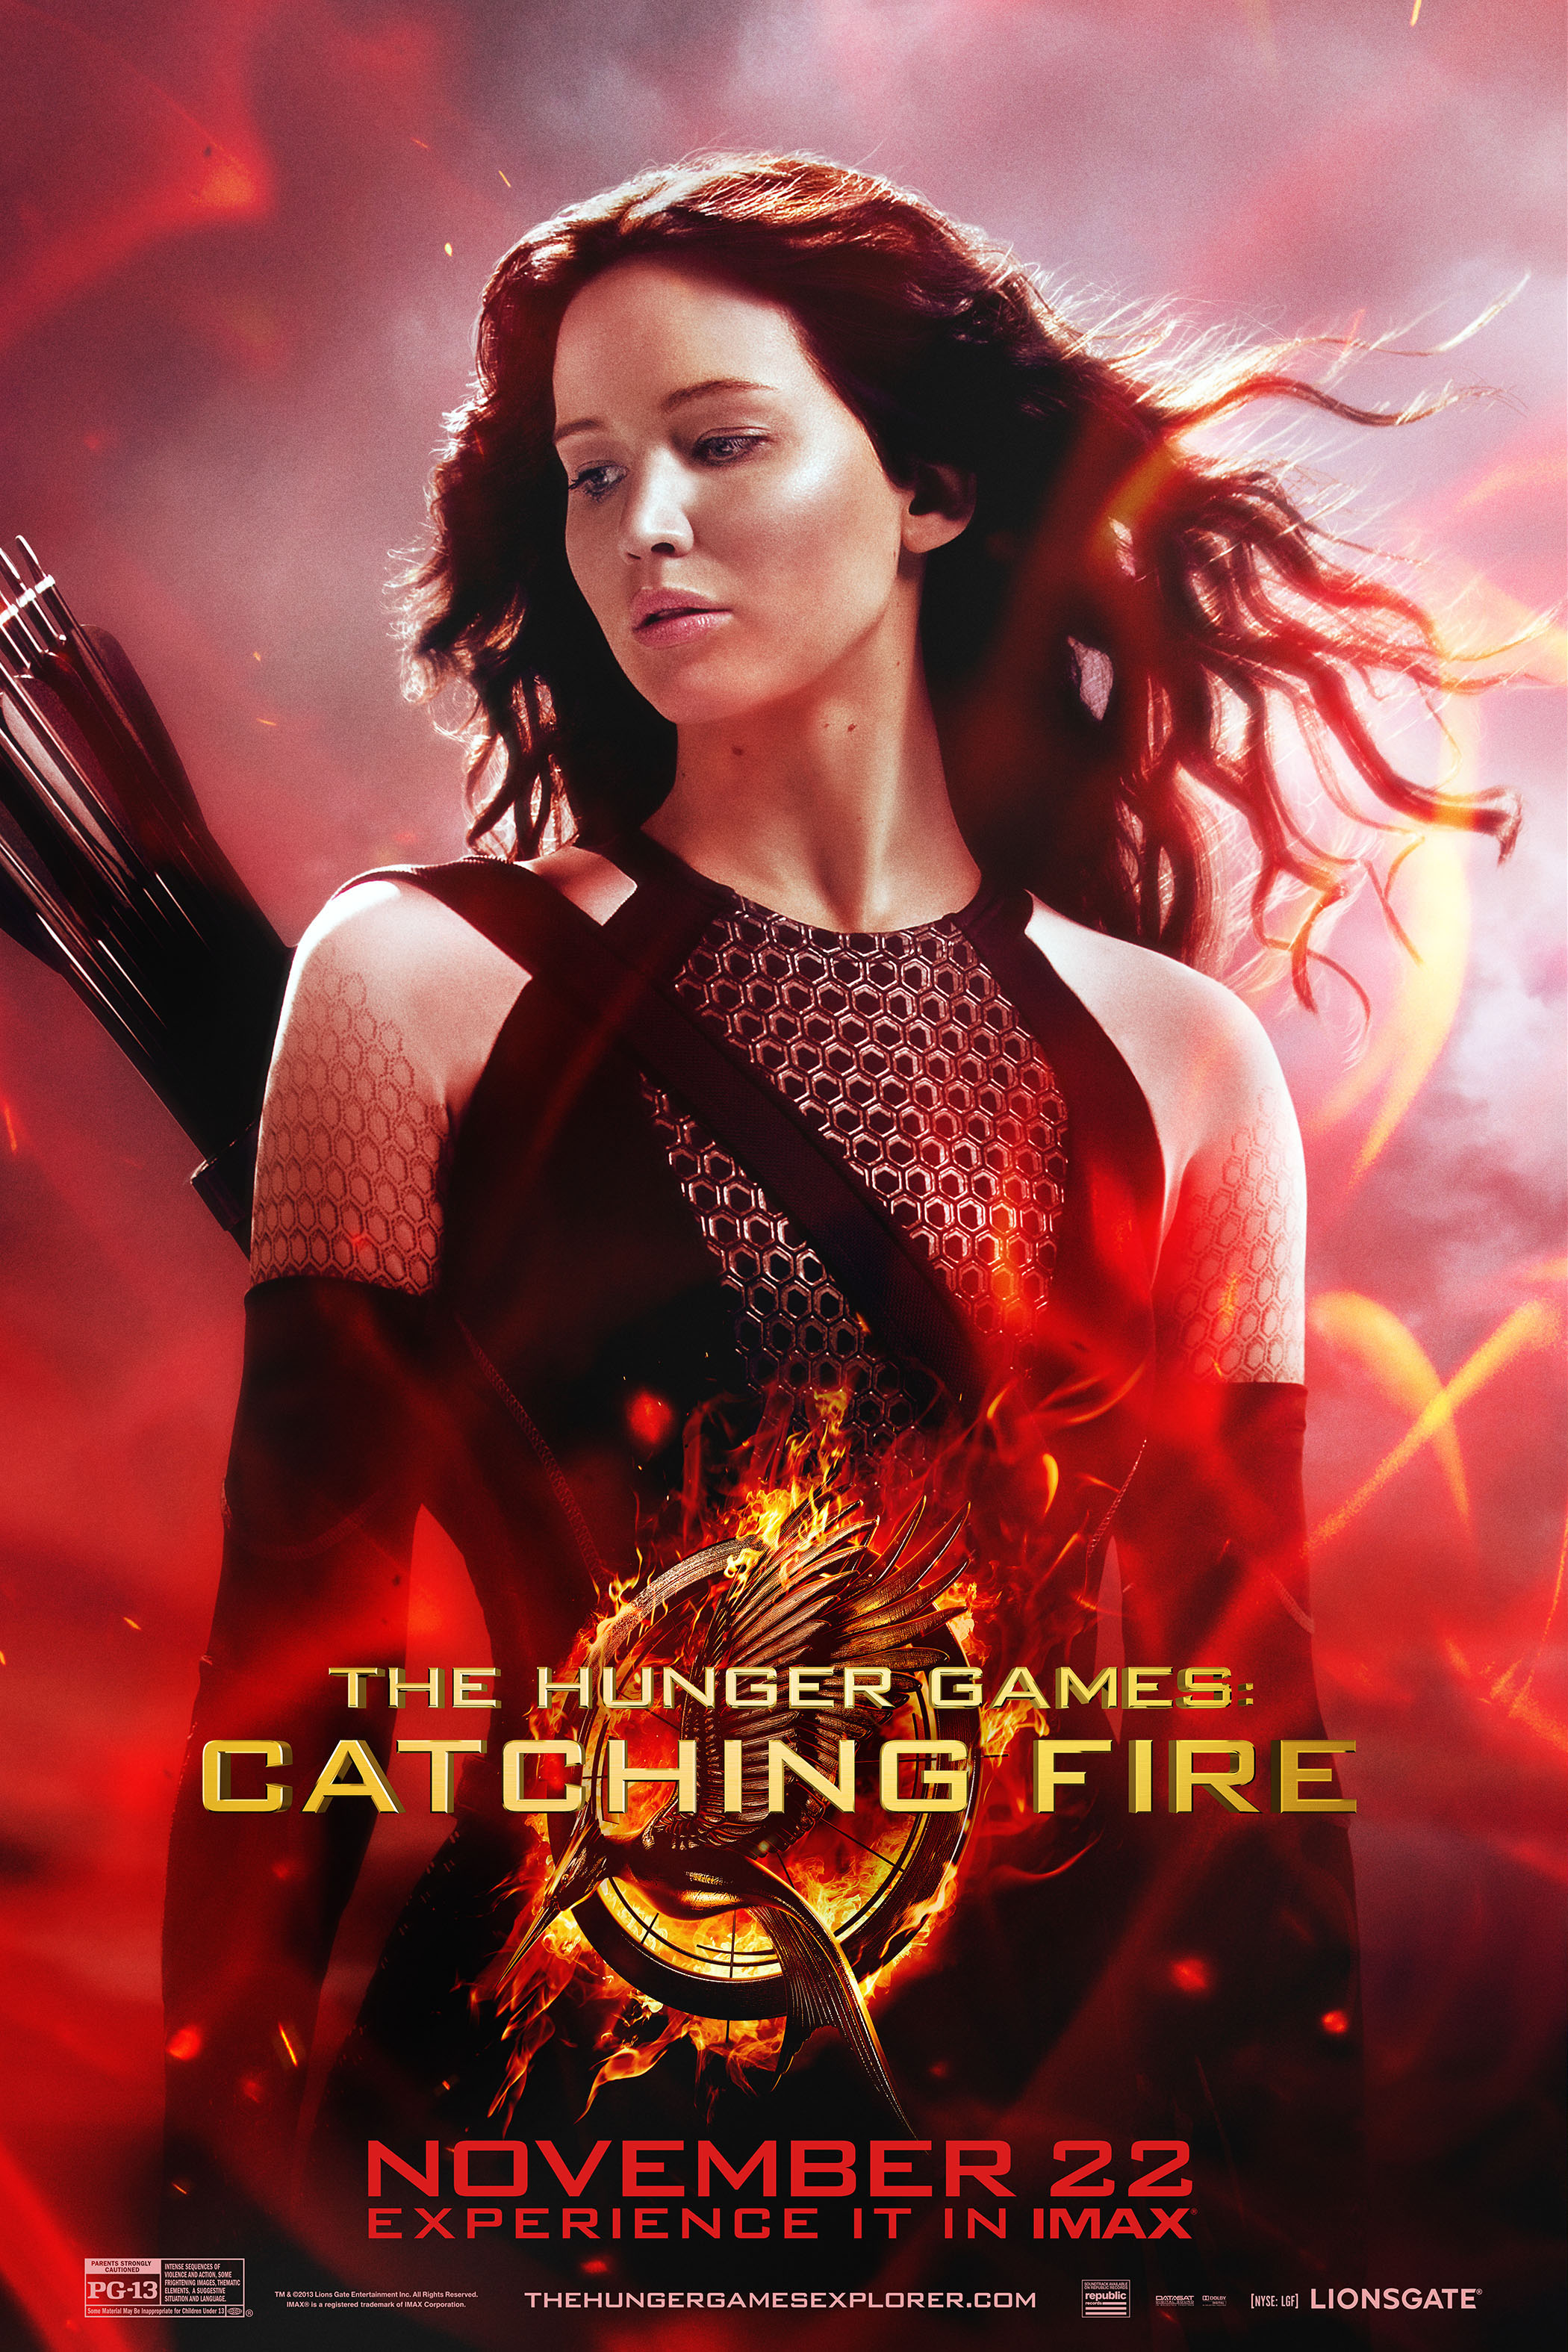 The Hunger Games: Catching Fire #3